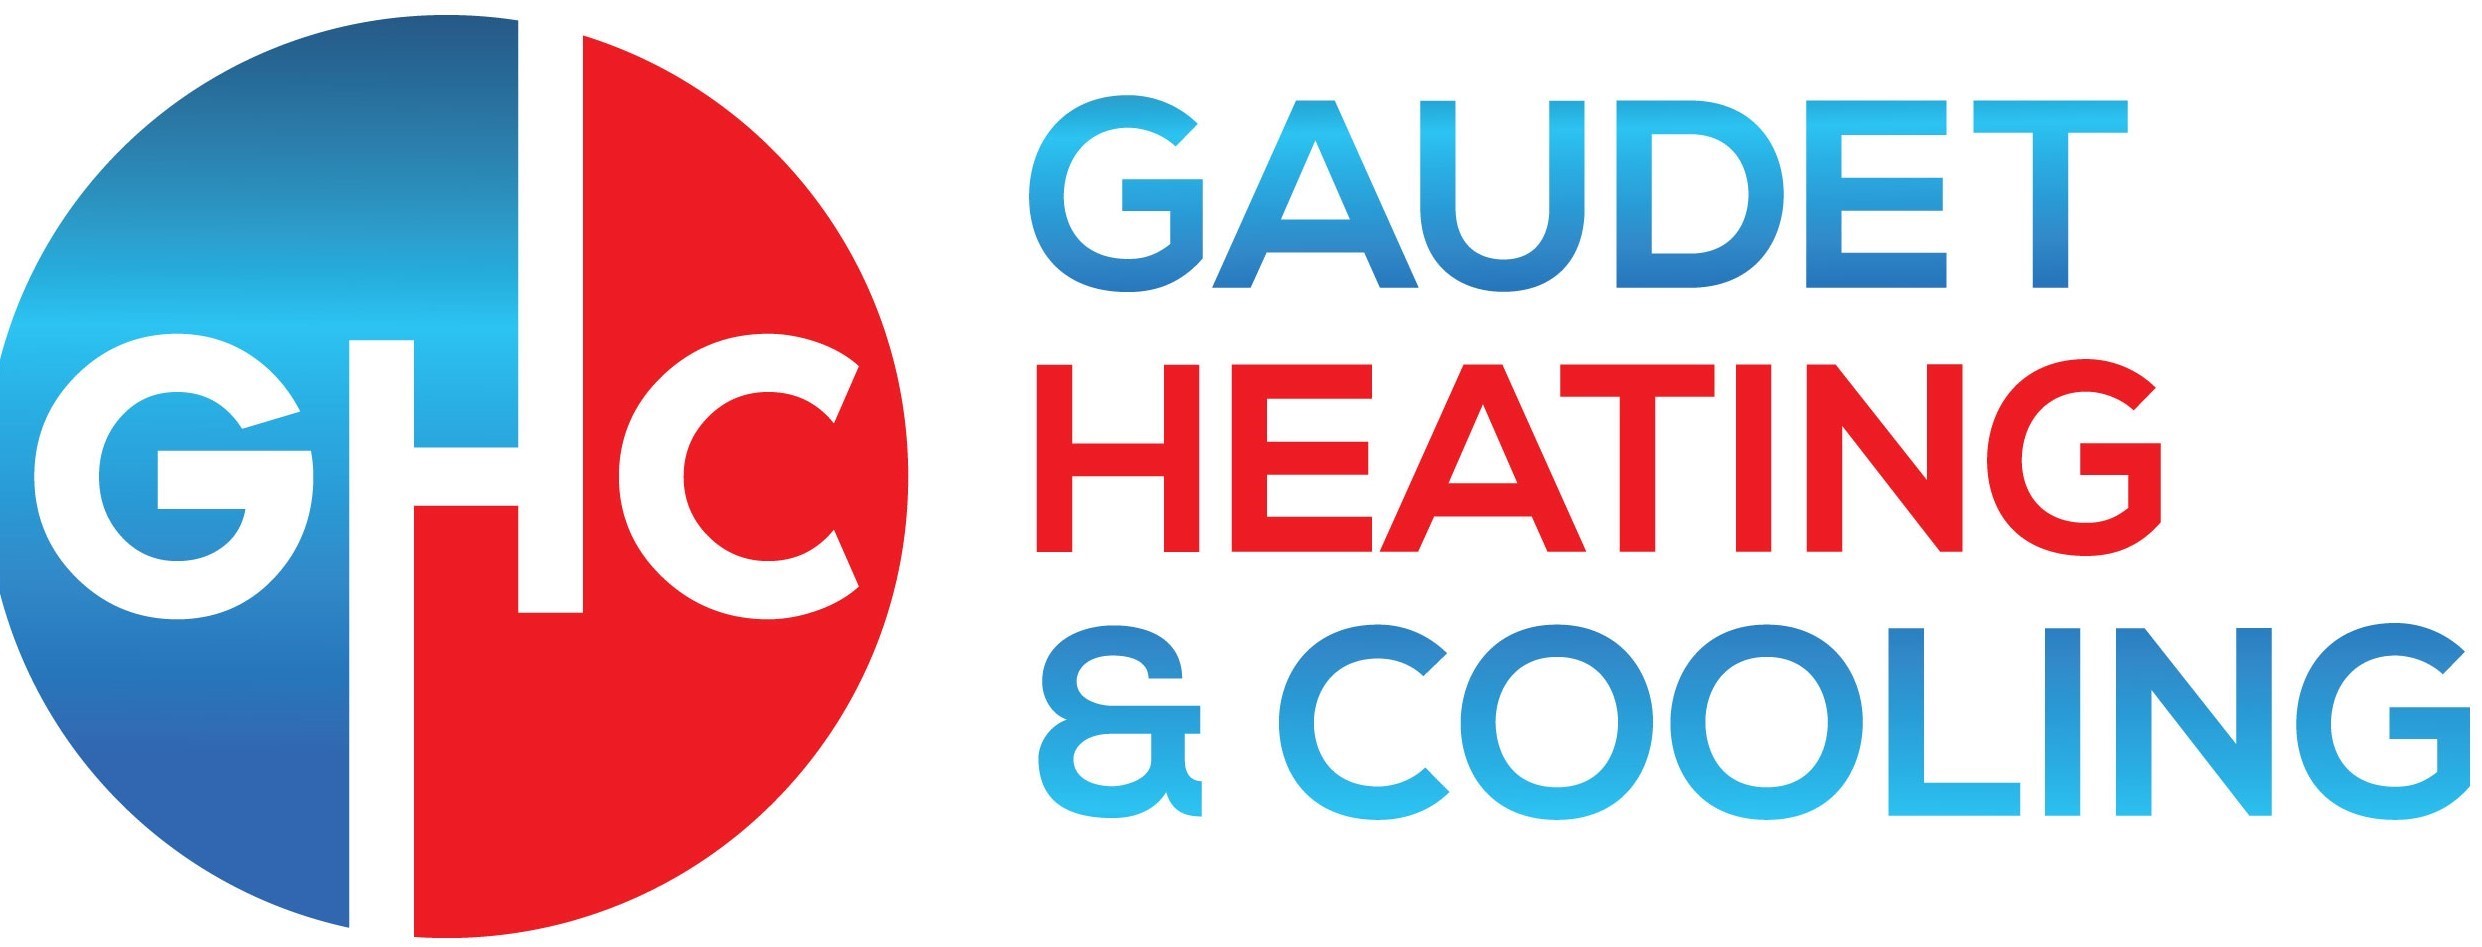 Gaudet Heating and Cooling